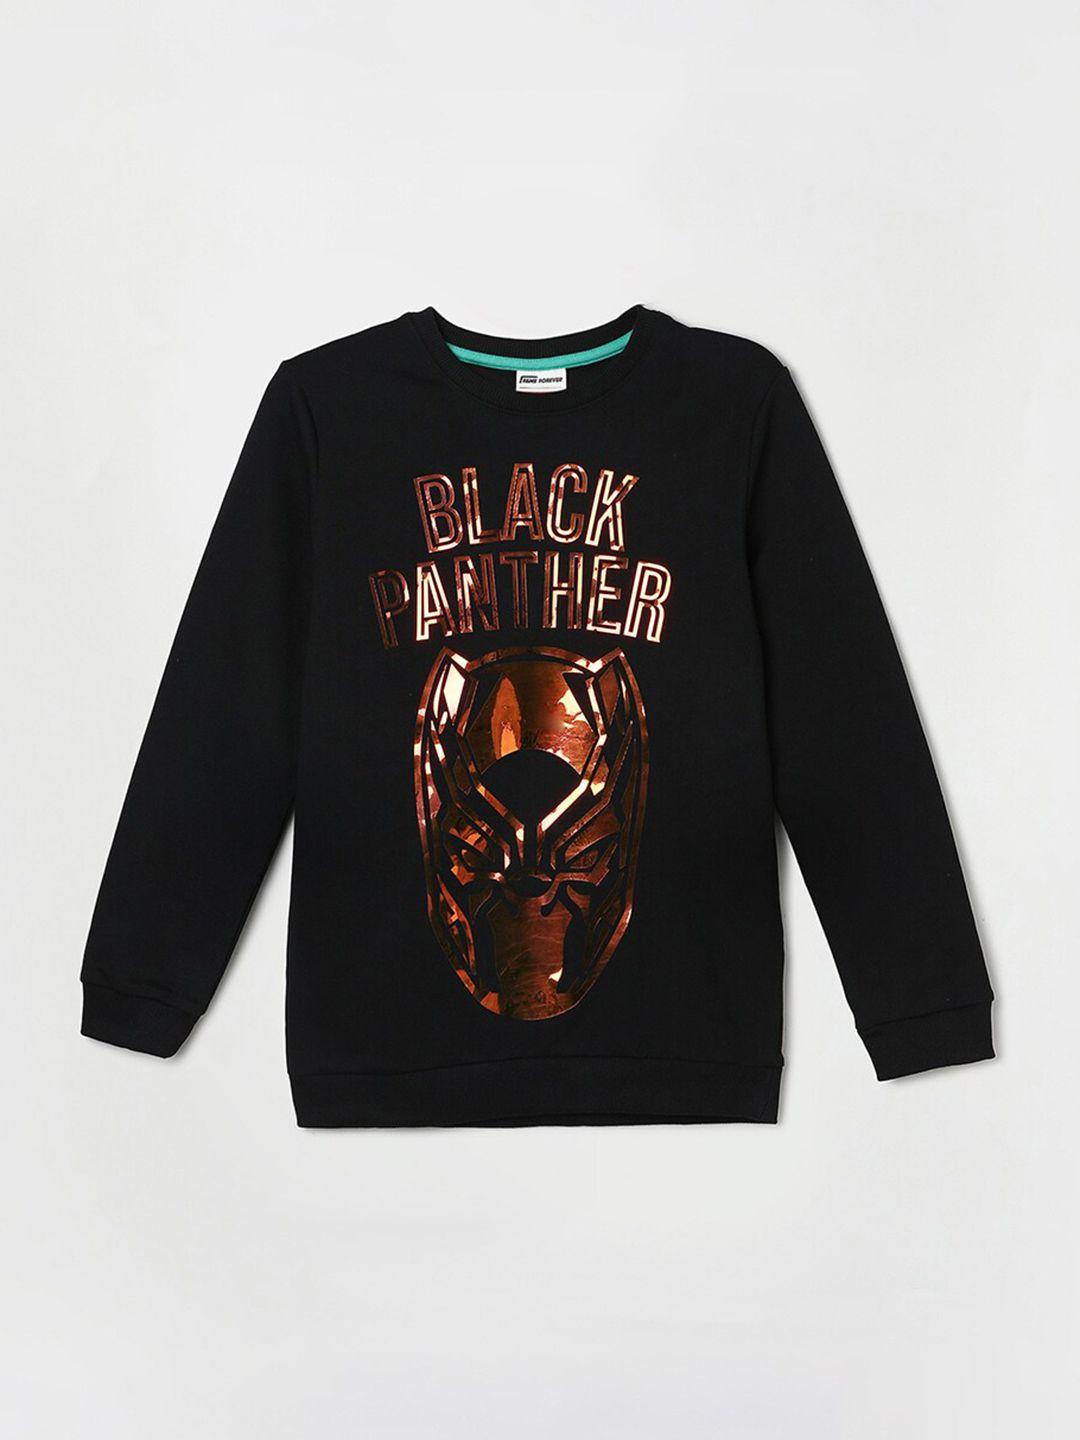 fame-forever-by-lifestyle-boys-black-panther-printed-long-sleeves-pure-cotton-pullover